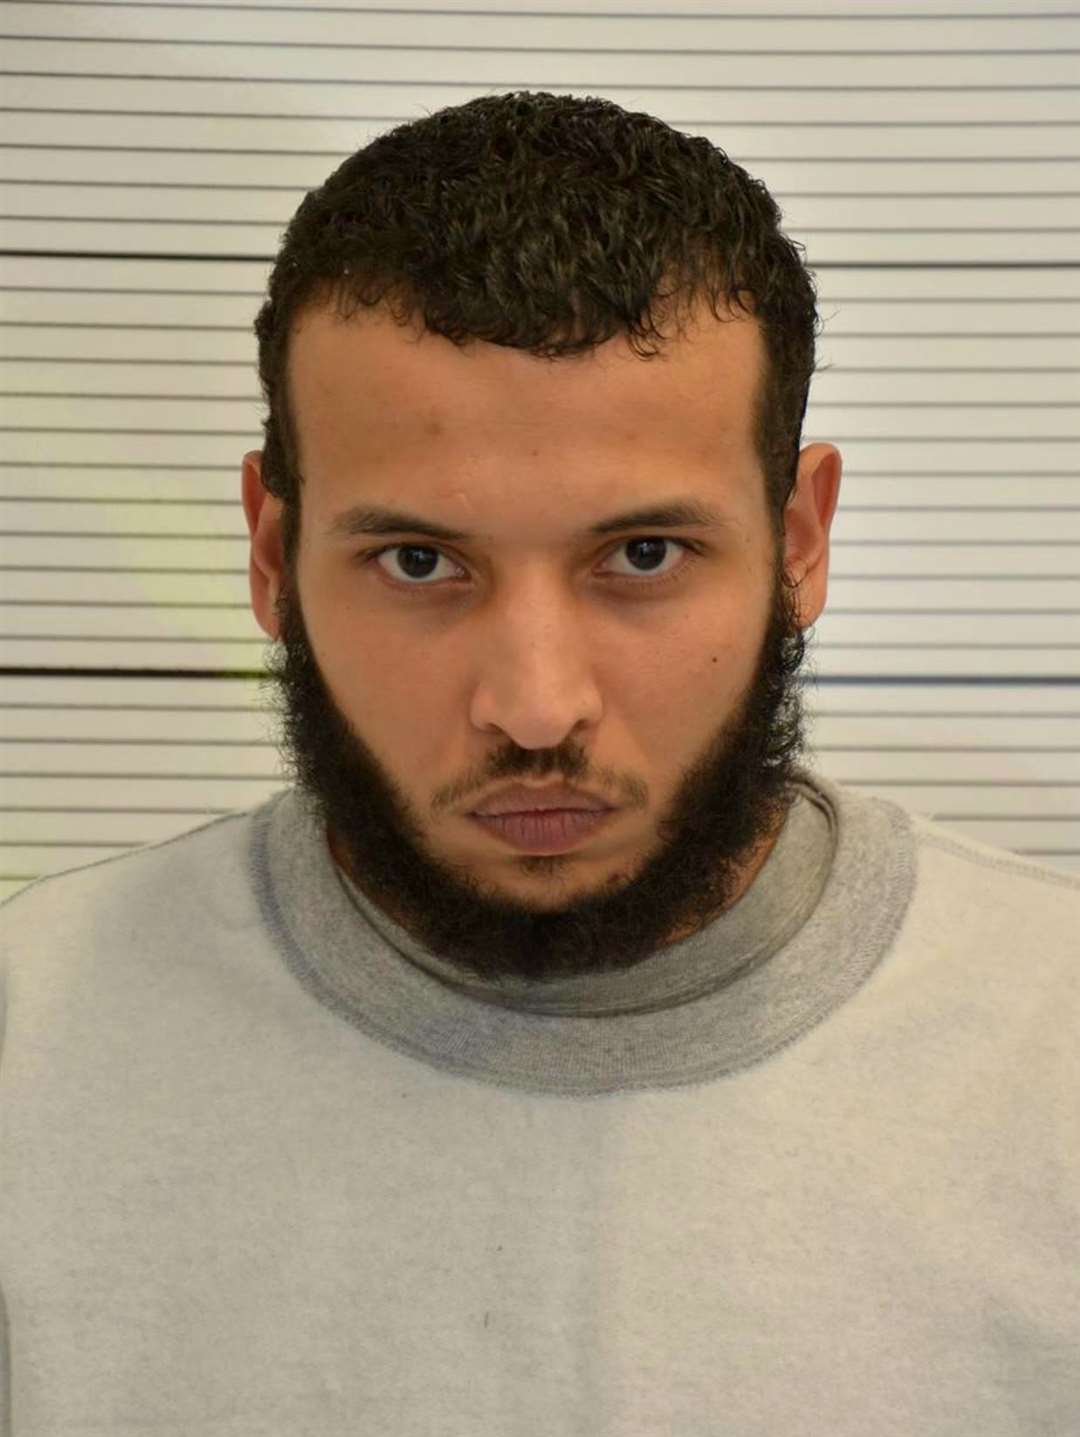 Khairi Saadallah killed three people and injured three others in his attack (Thames Valley Police/PA)